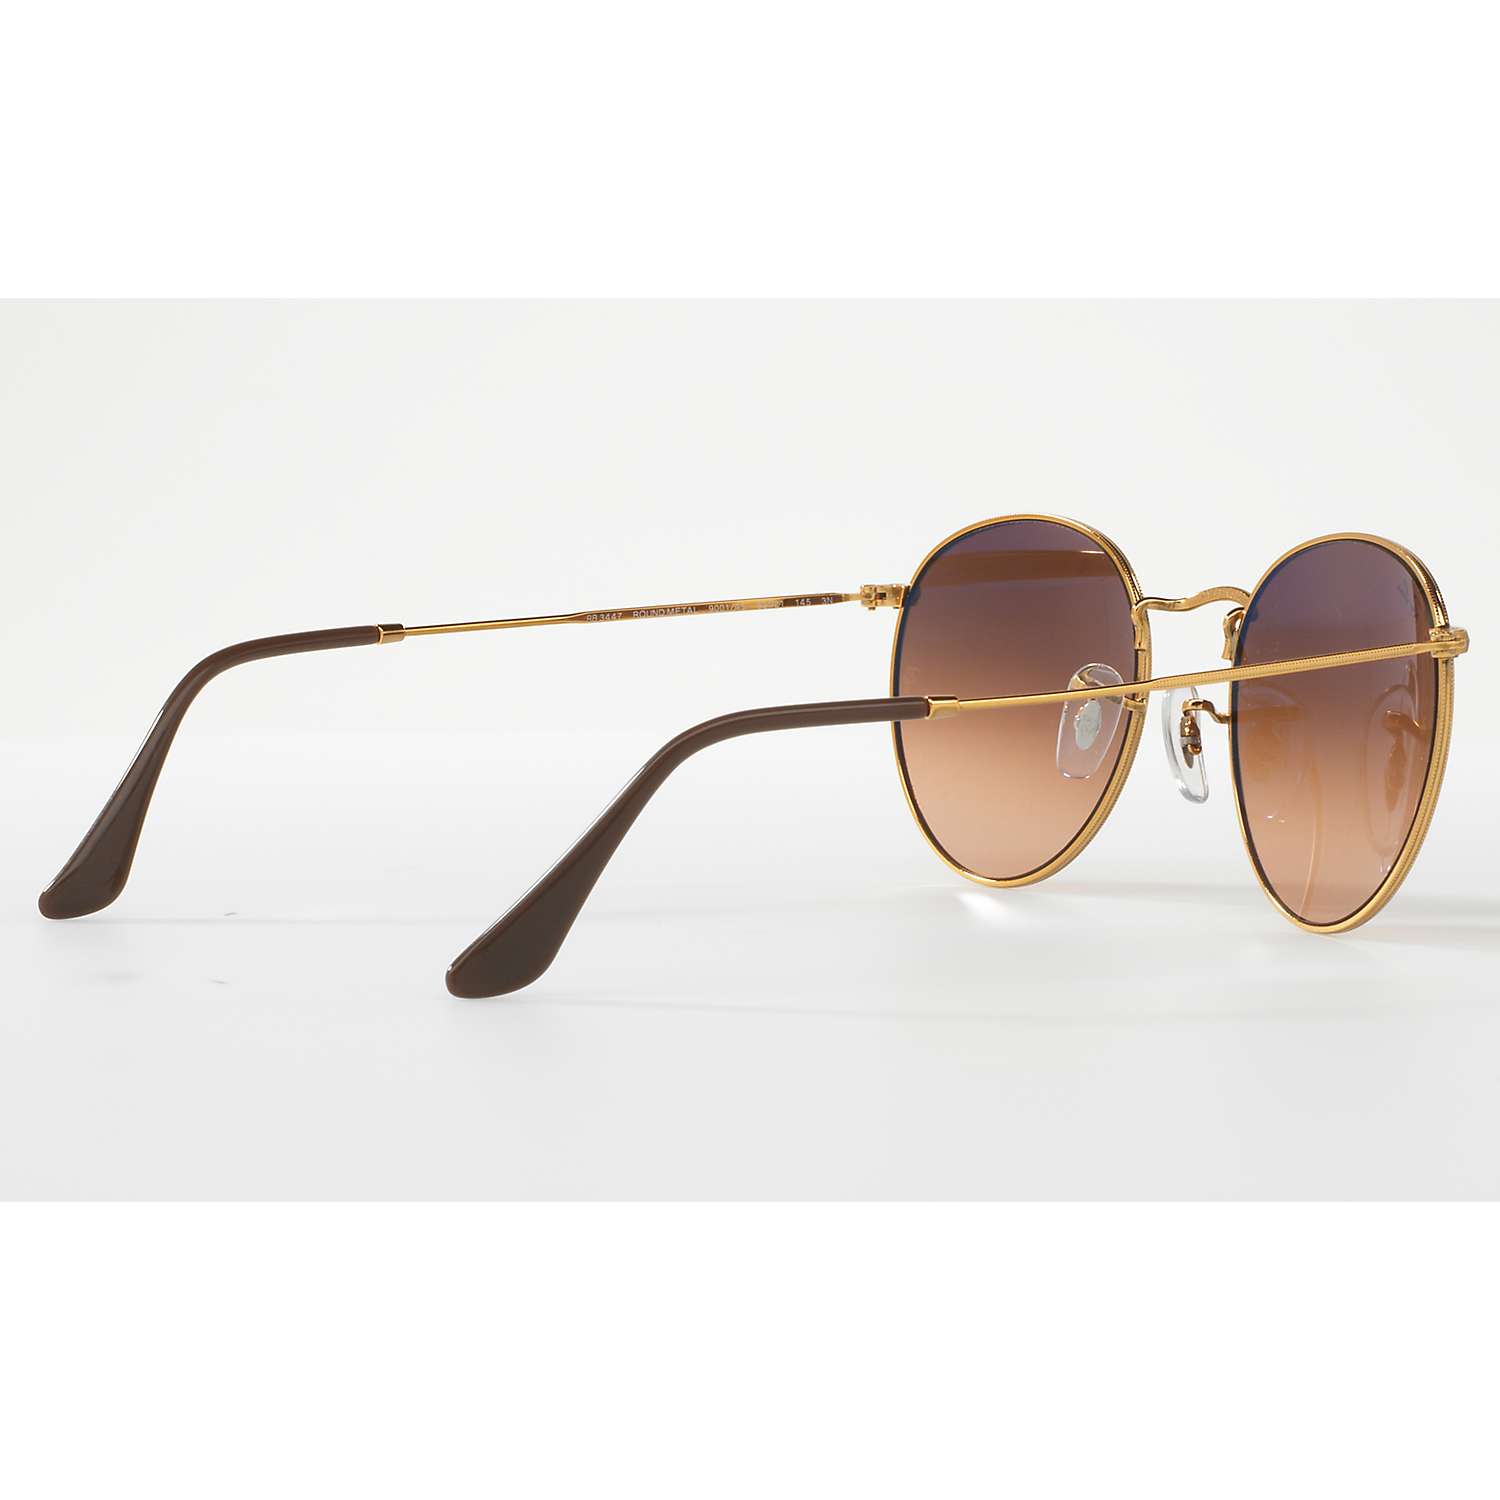 Buy Ray-Ban RB3447 Round Sunglasses Online at johnlewis.com